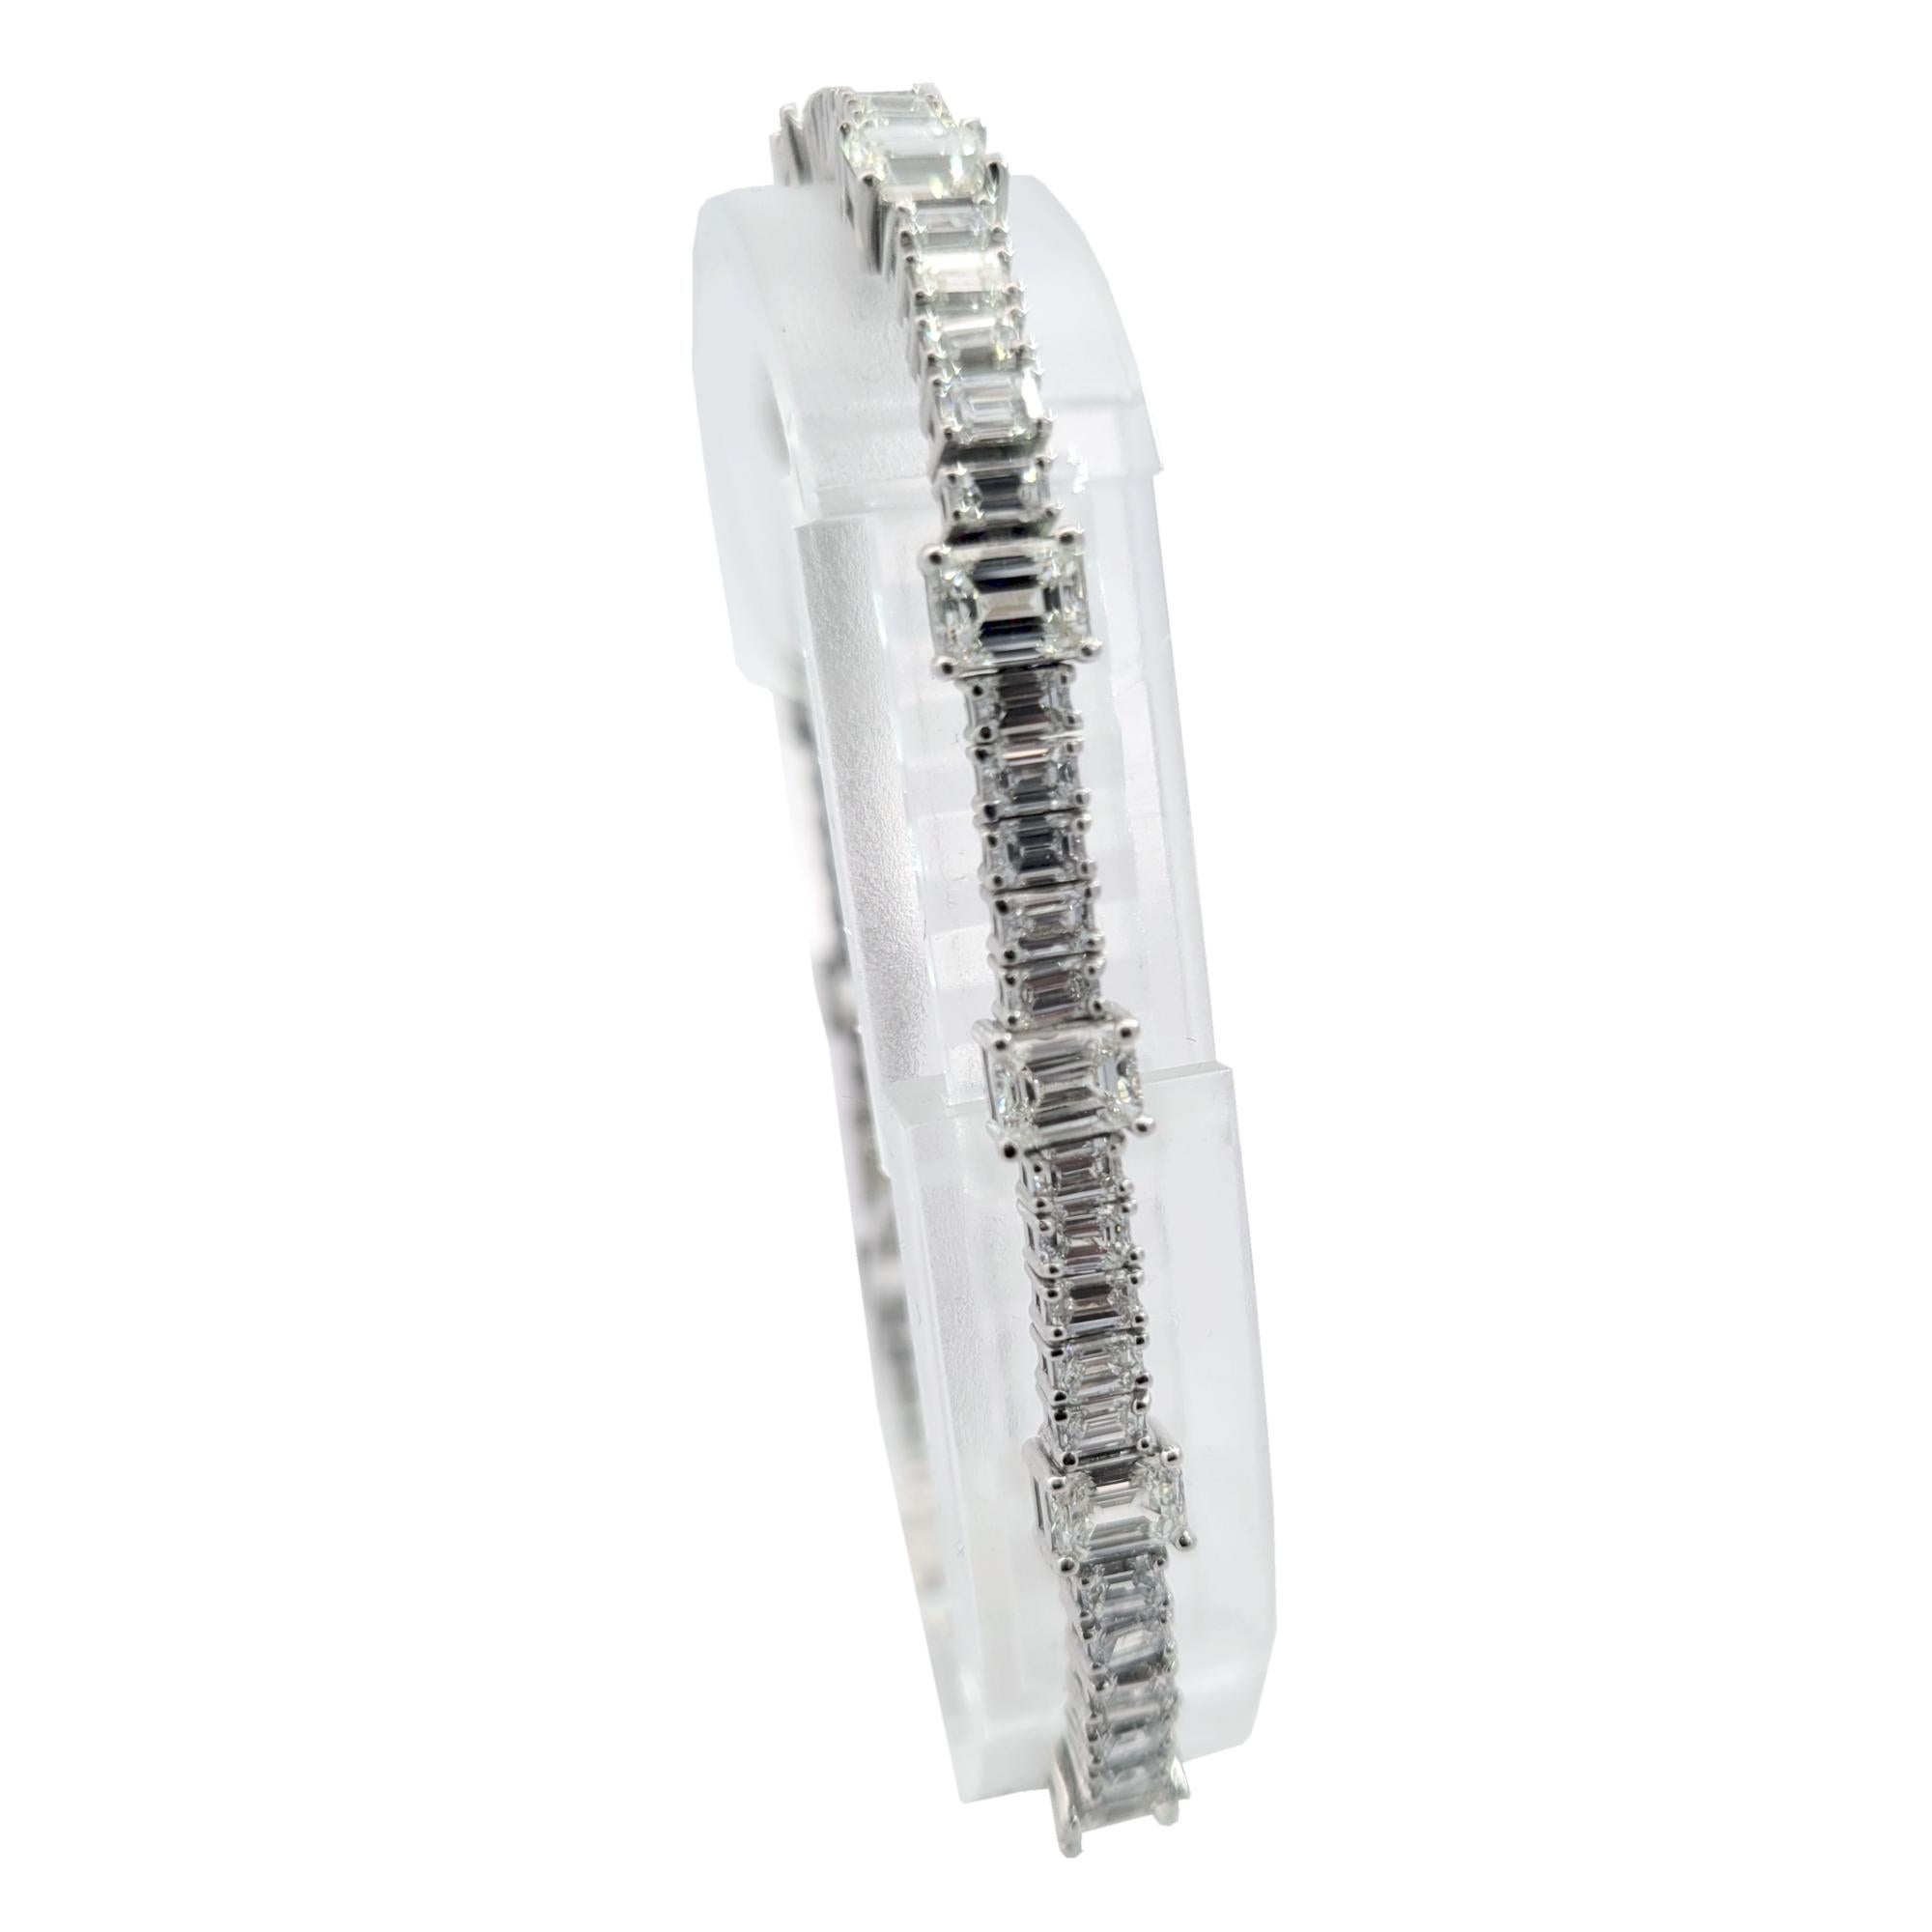 This elegant Diamond Tennis Bracelet consists of 60 perfectly matched 3.1 x2.0 mm Emerald Cut diamonds  and  12 pieces of  4.8x3.8 mm Emerald Cut Diamonds set in Platinum. It is 7 inch long and about 5 mm wide.  This bracelet is made by the highest